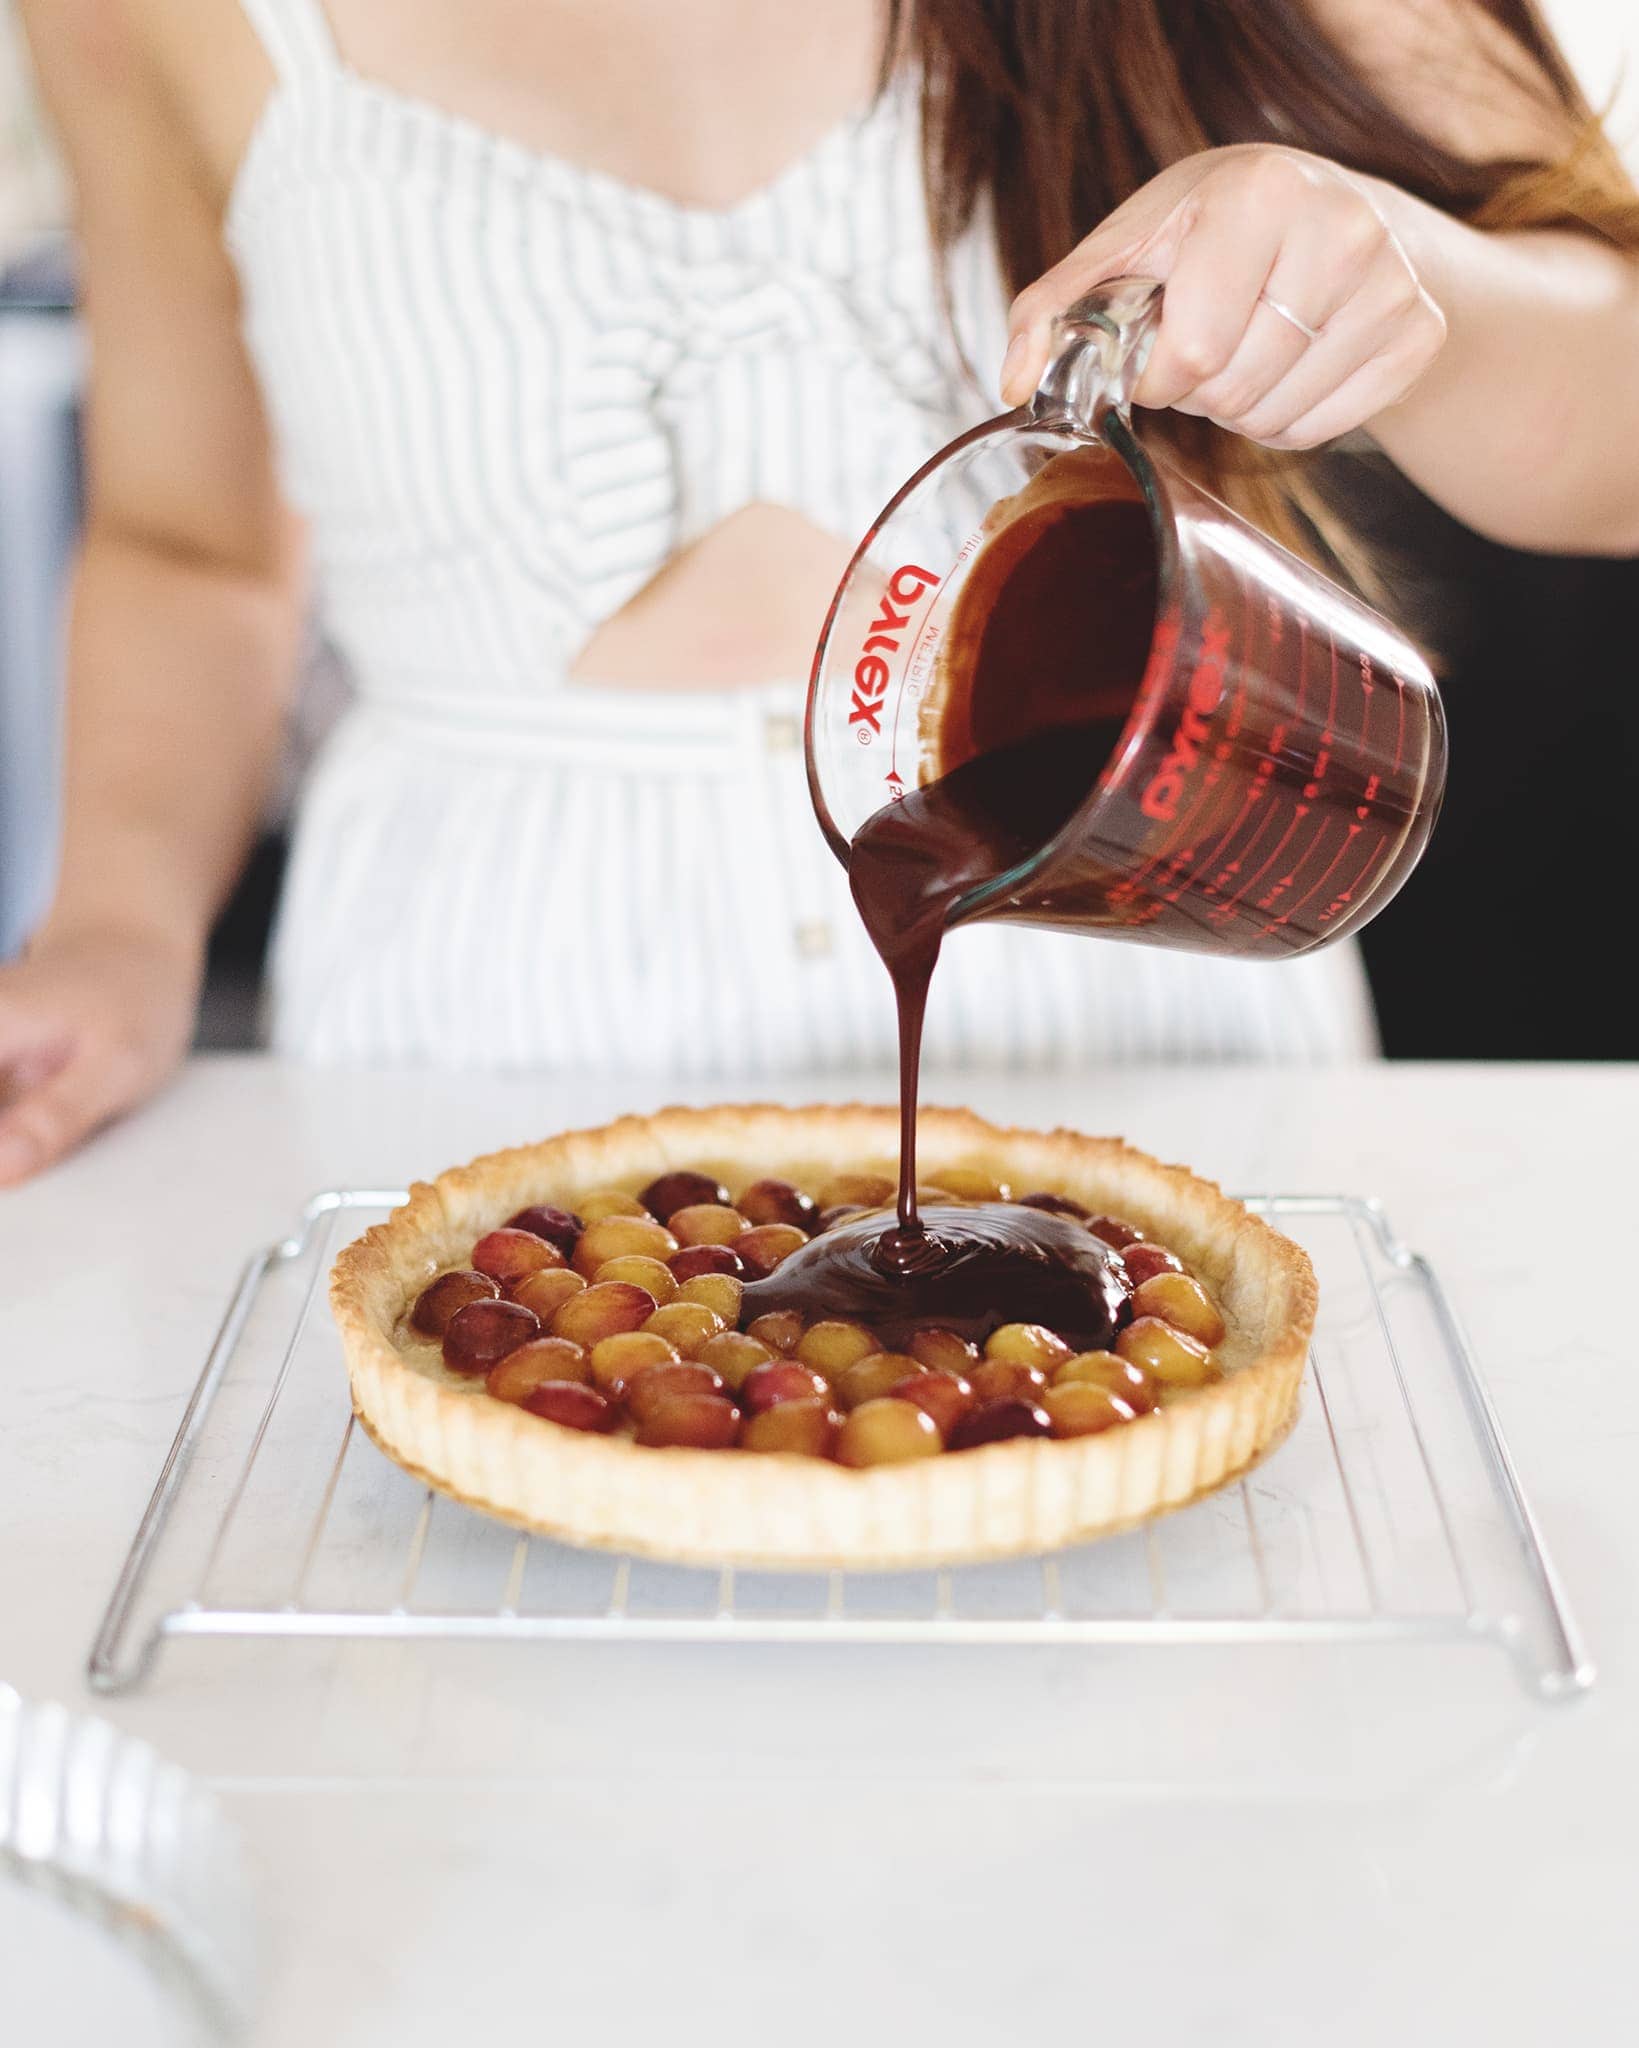 Pouring chocolate ganache on top of cherries in tart base